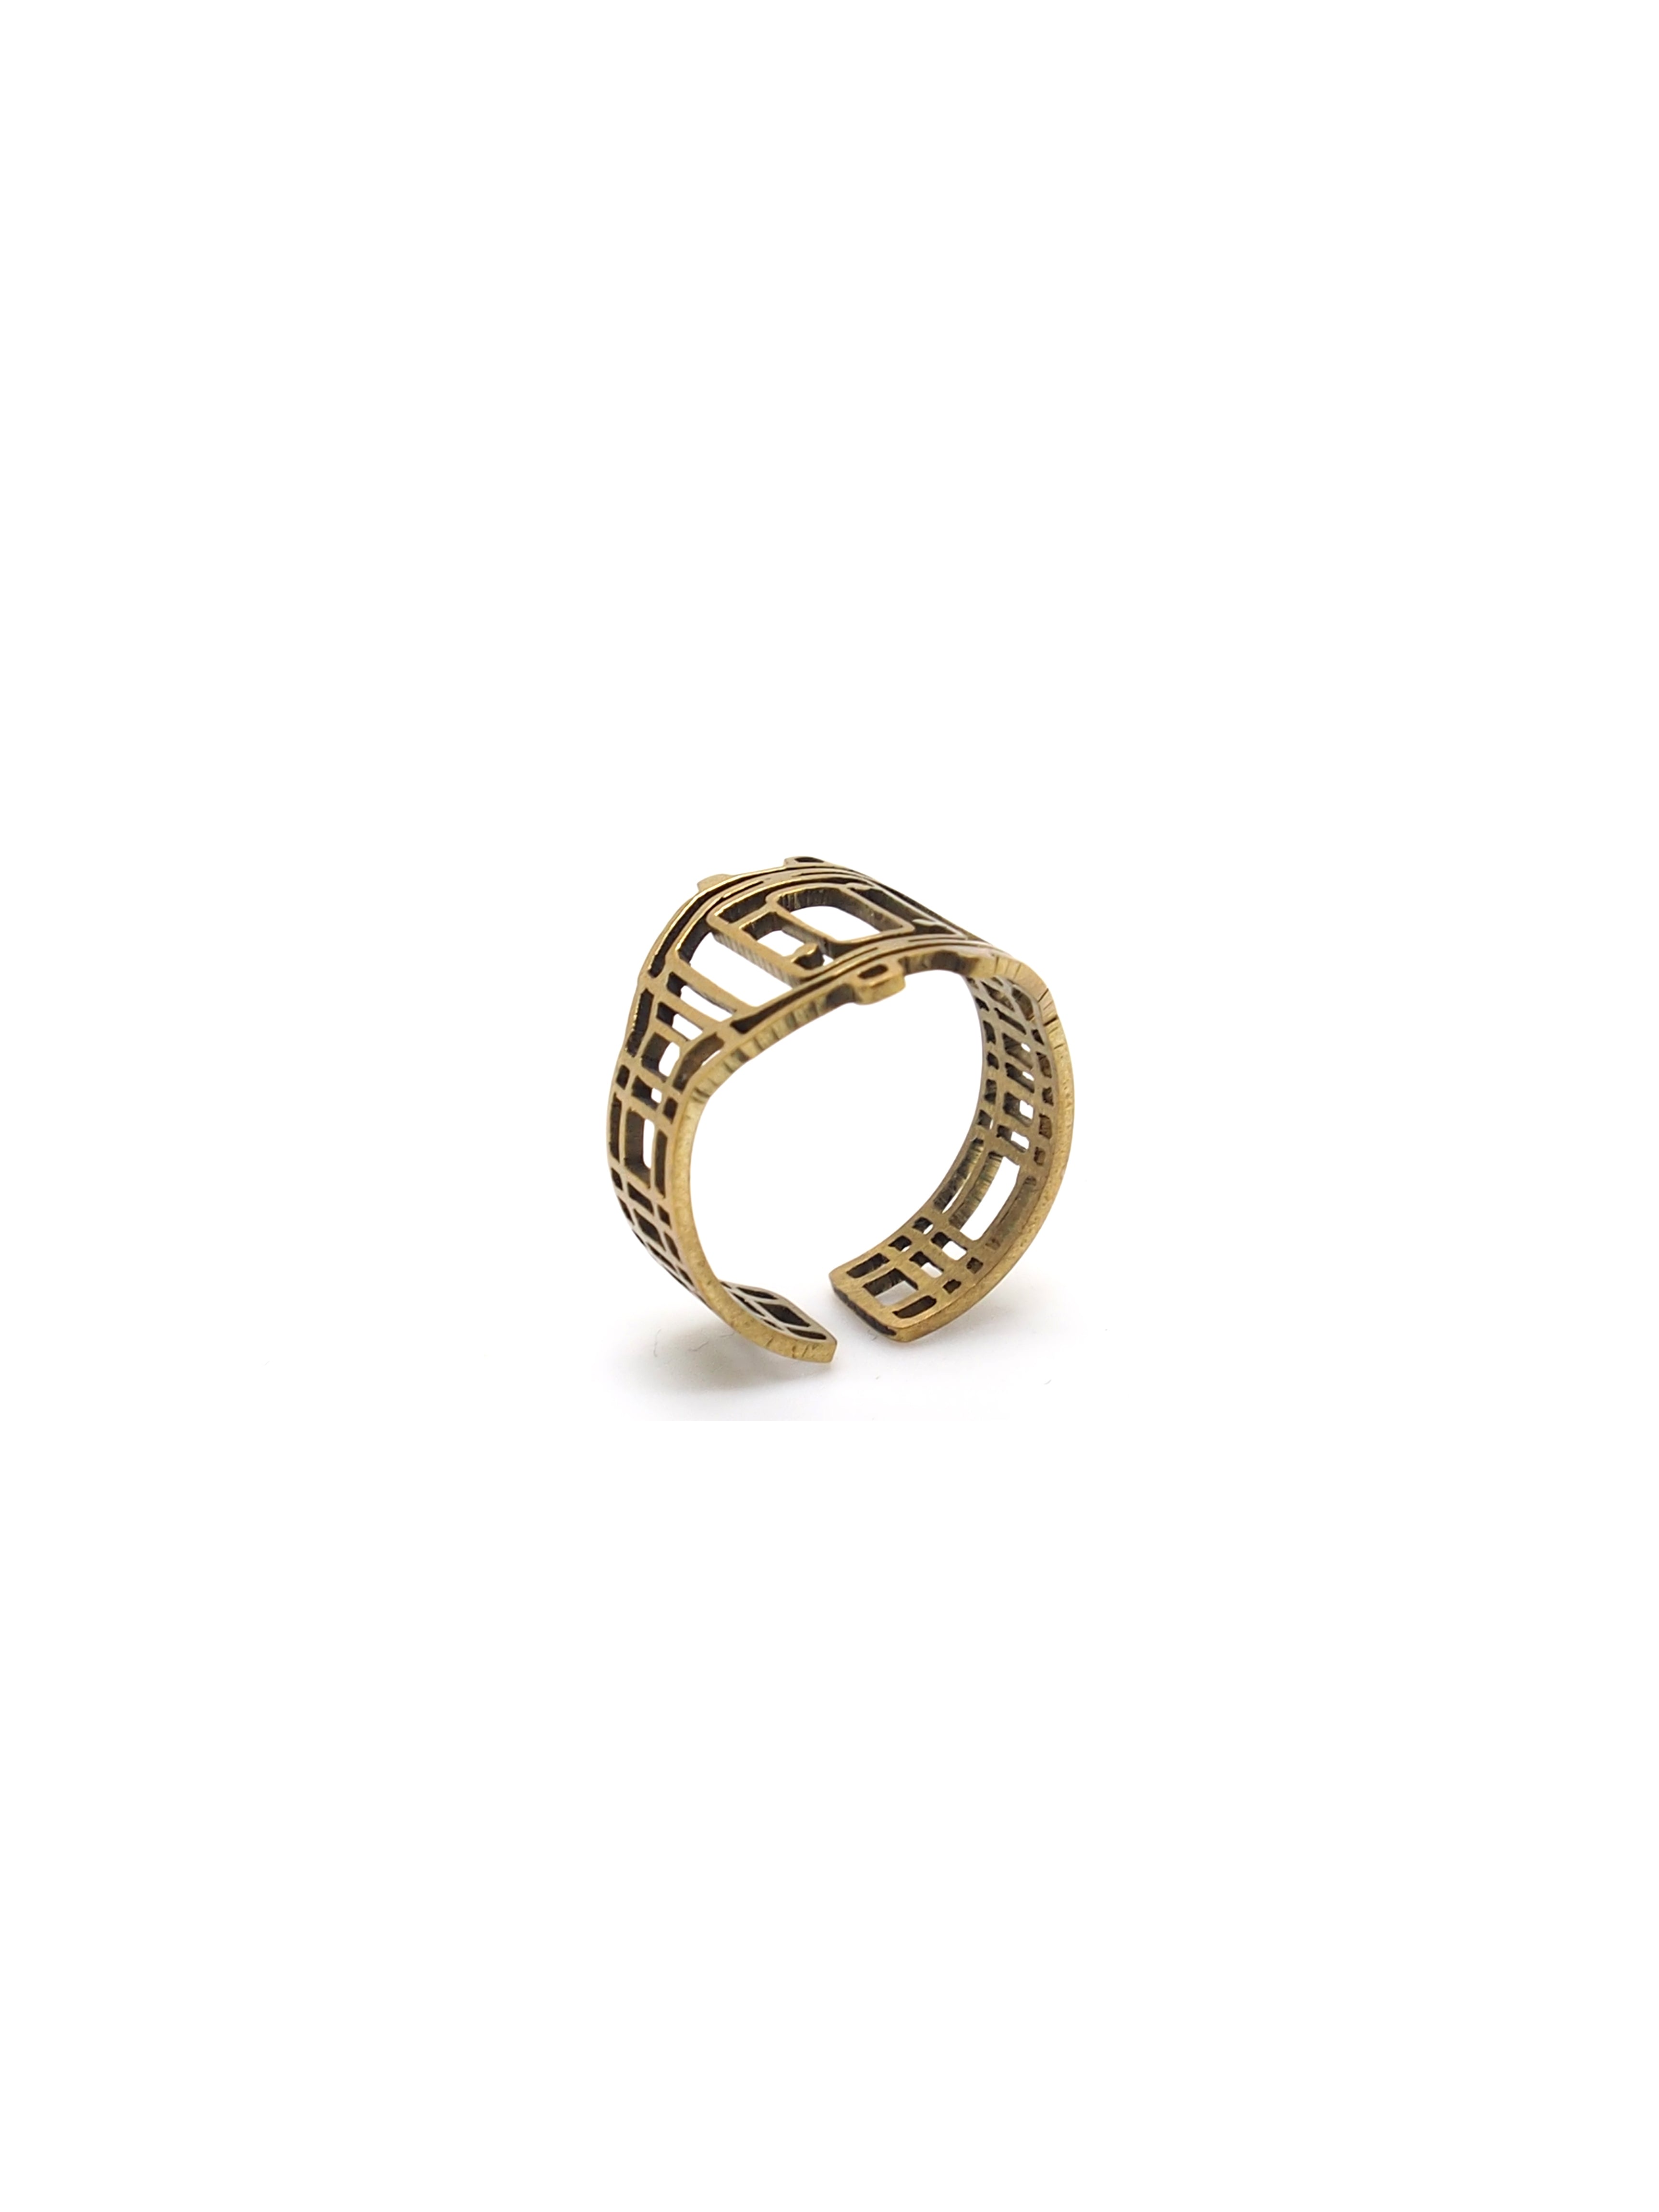 Hansel & Smith - Vintage Watch Ring